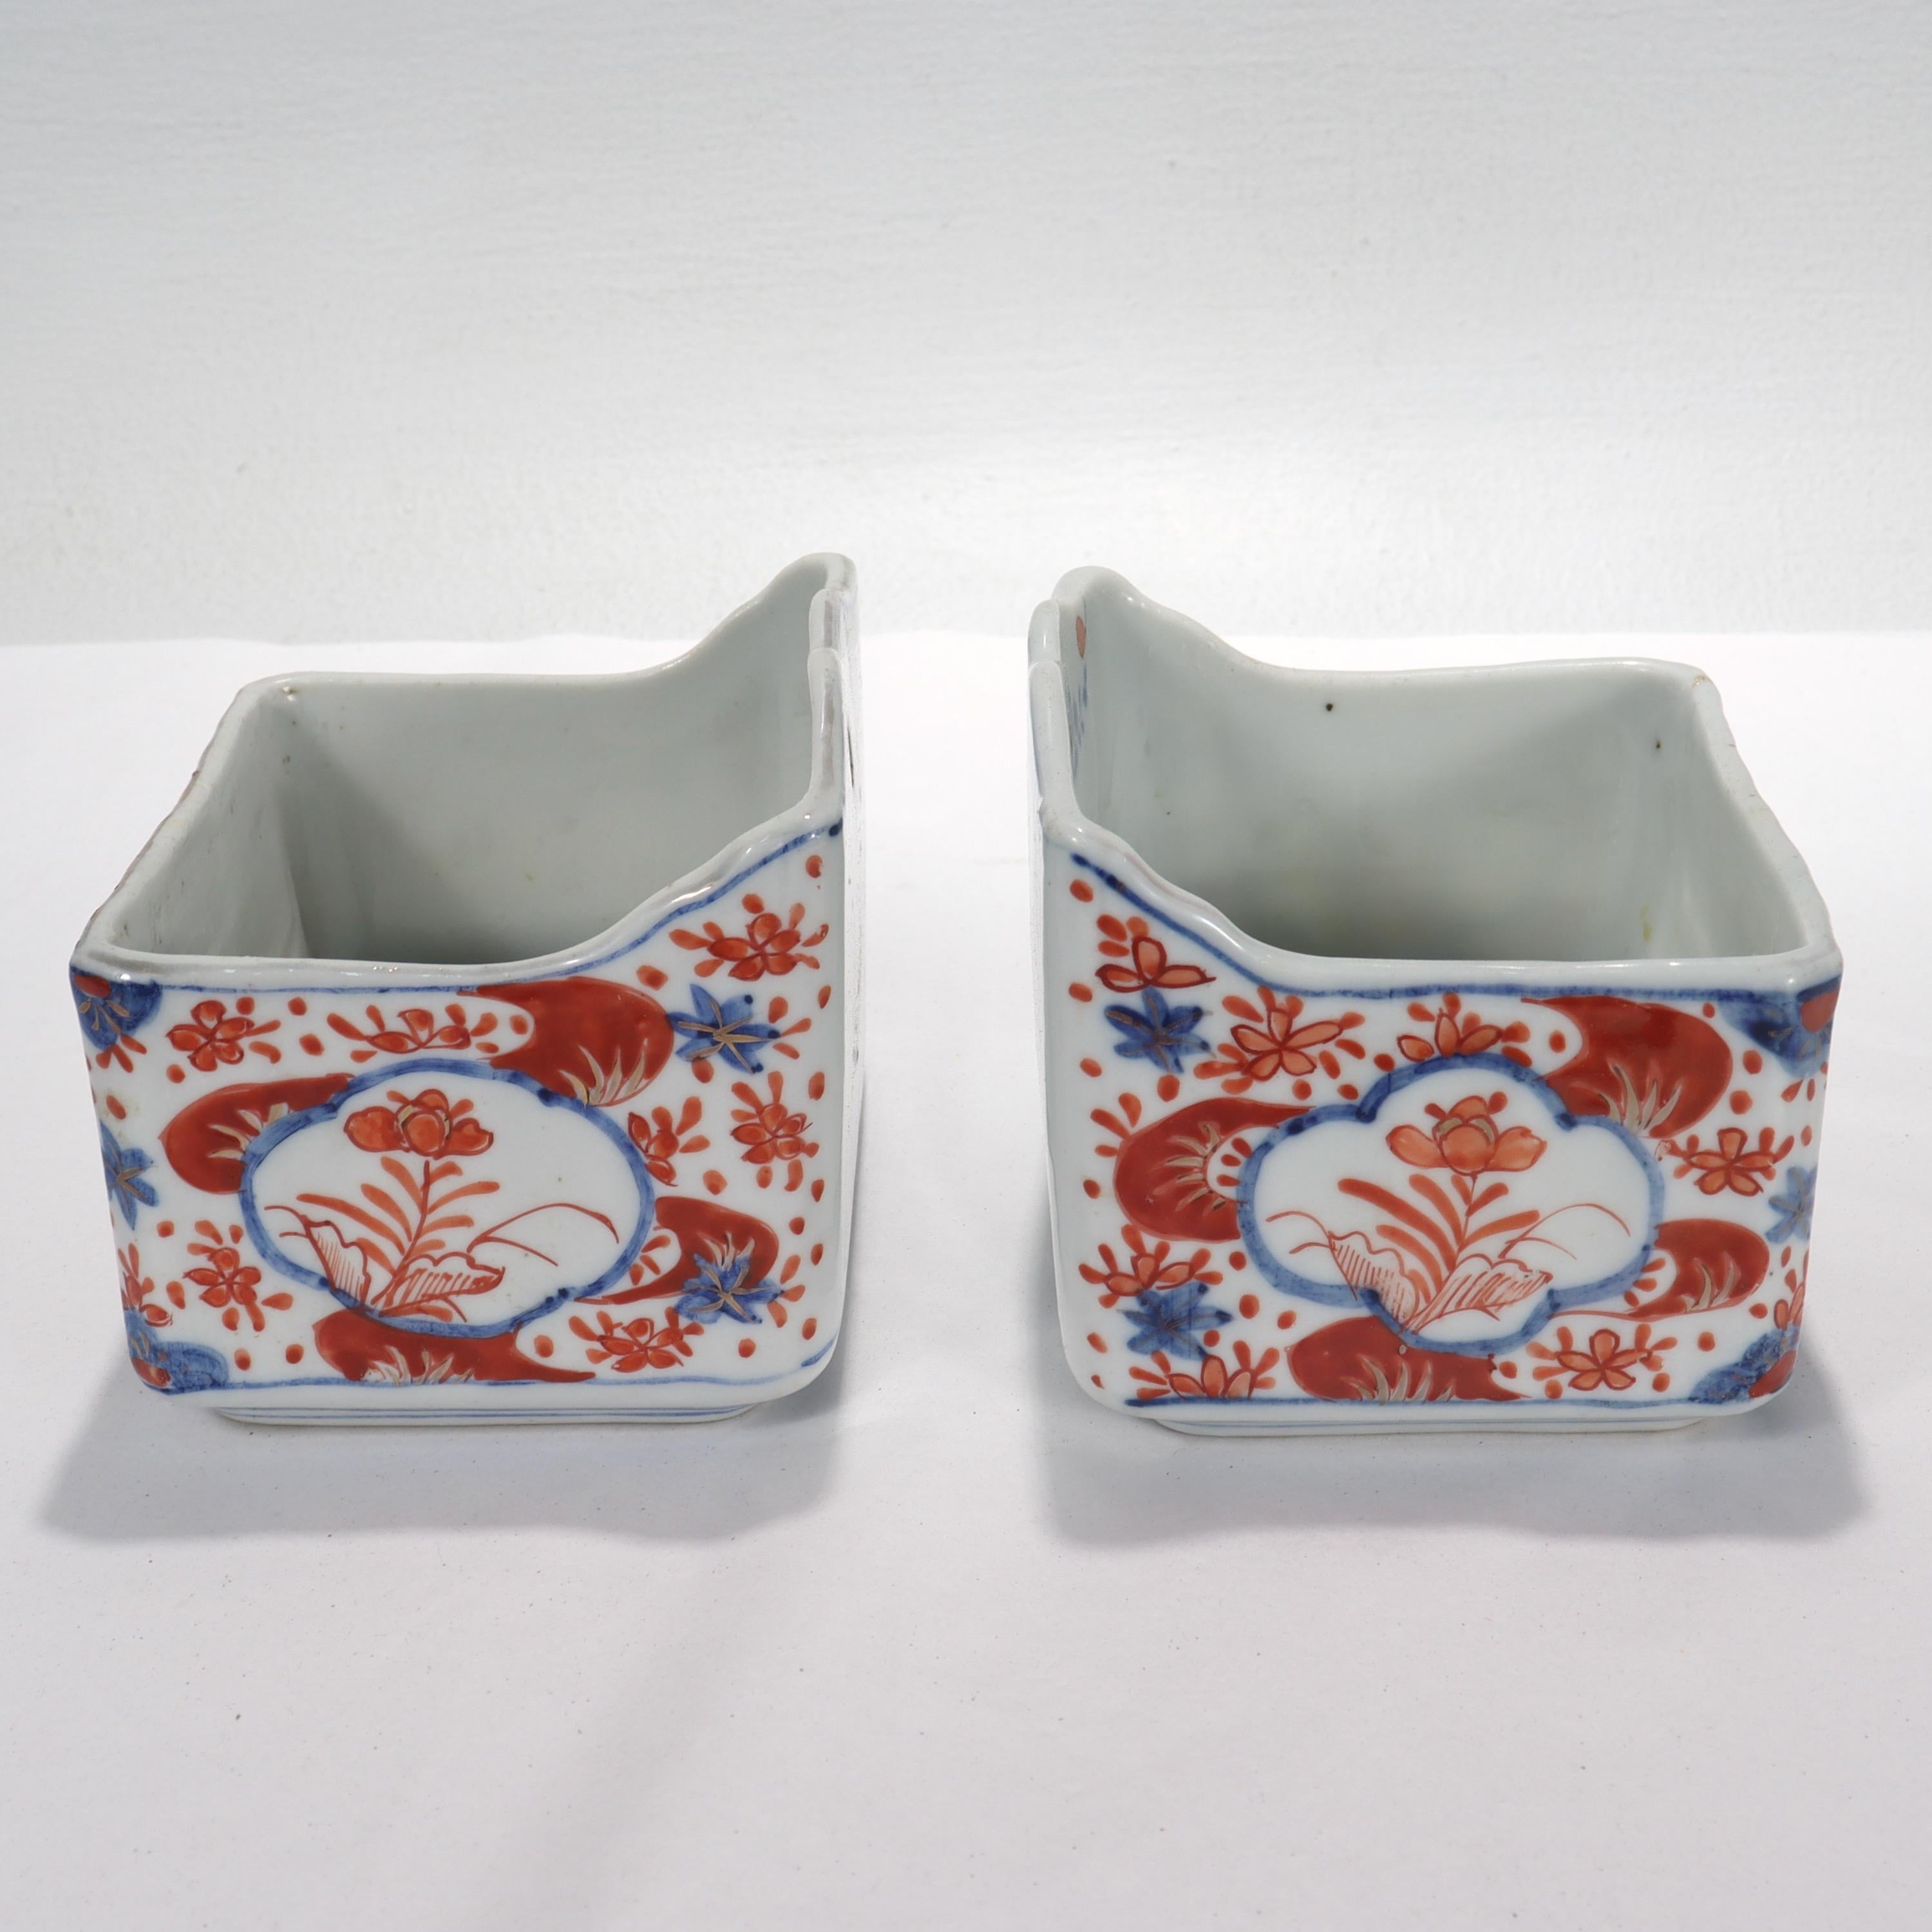 Pair of Old or Antique Japanese Imari Porcelain Soap Dishes In Fair Condition For Sale In Philadelphia, PA